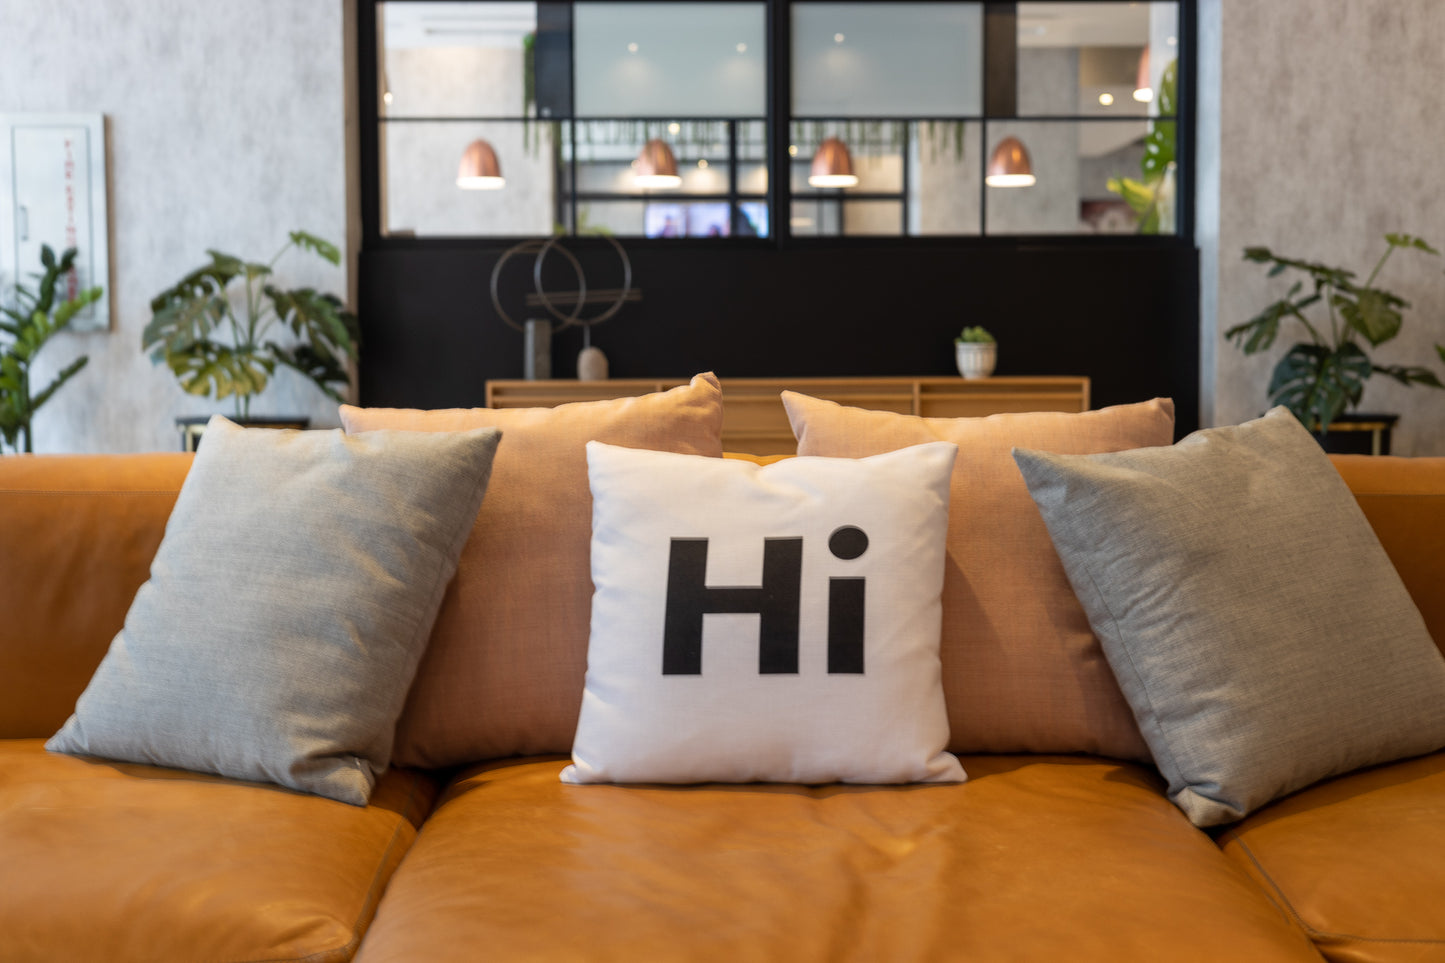 Hi Pillow by Hi Johnny in white in a building lounge space on a leather couch